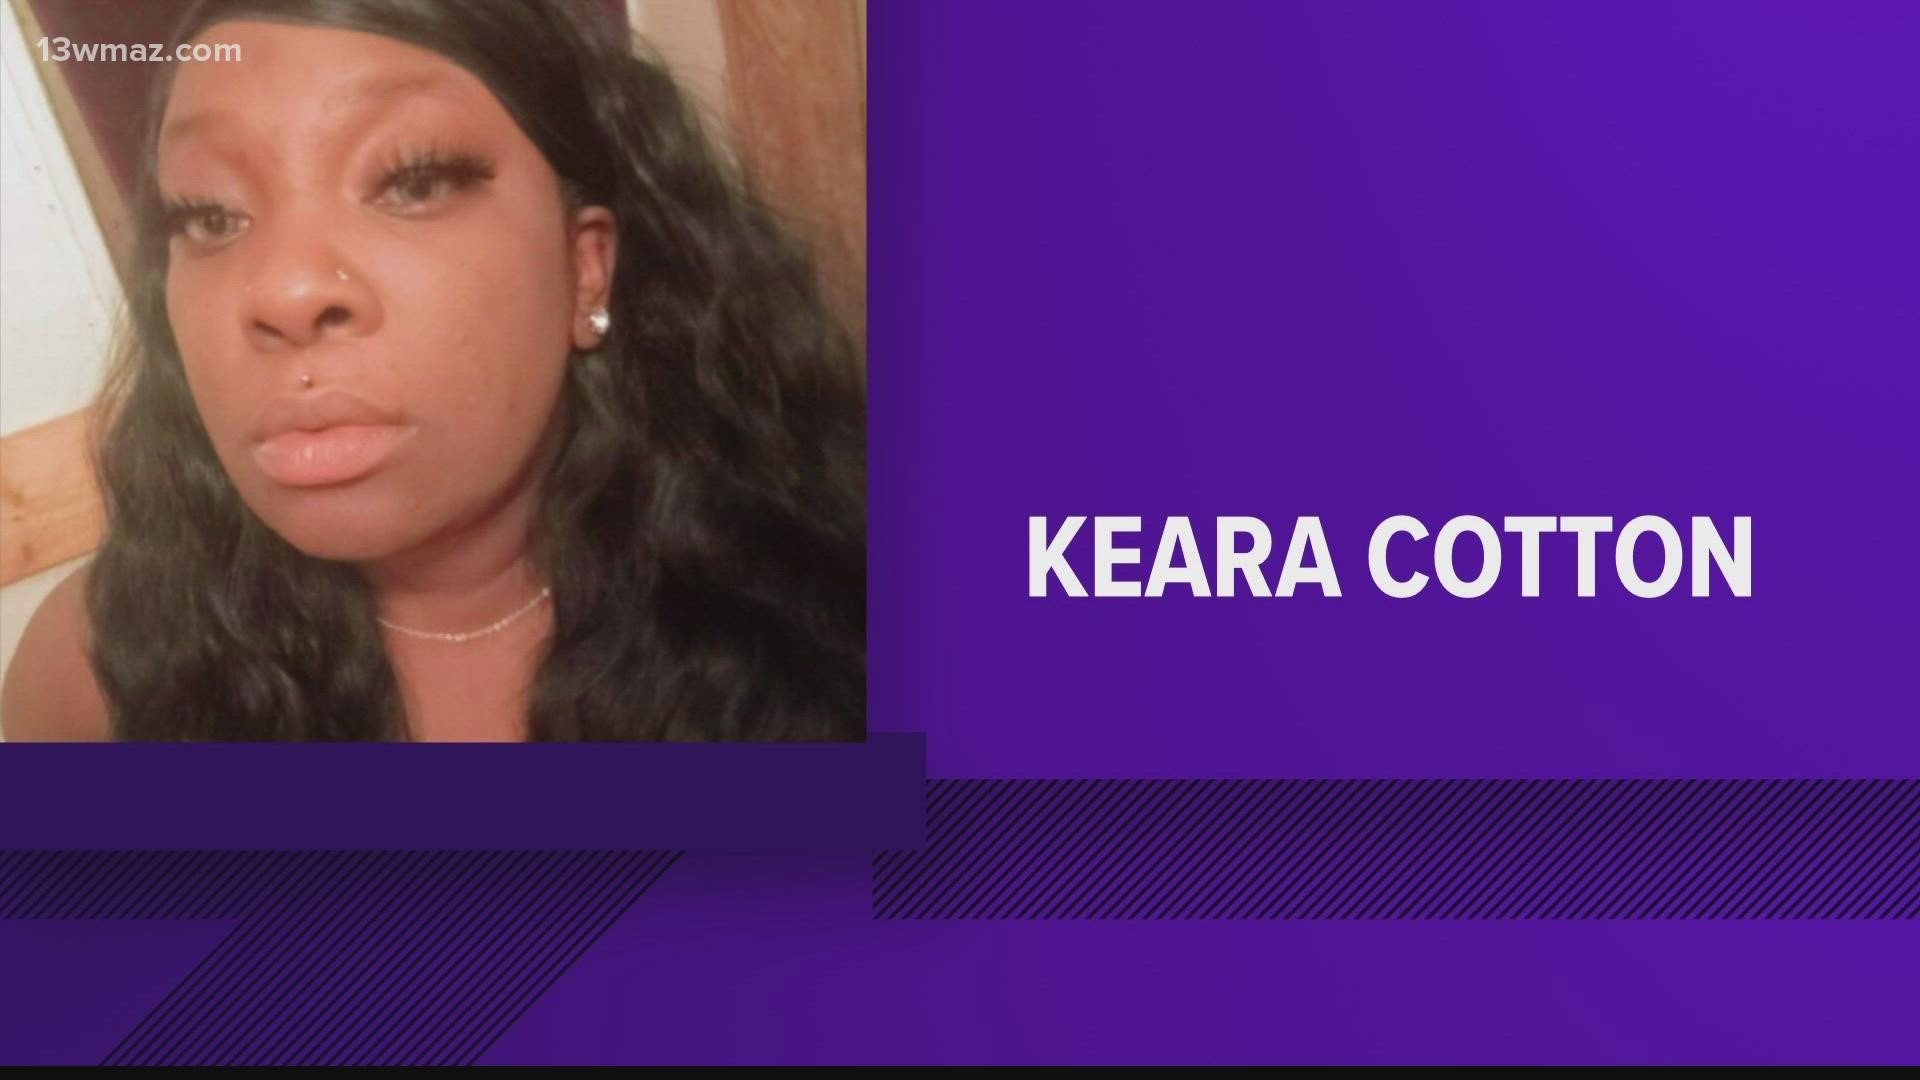 According to the GBI, 27-year-old Keara Cotton is facing a charge of murder and concealing the death of another